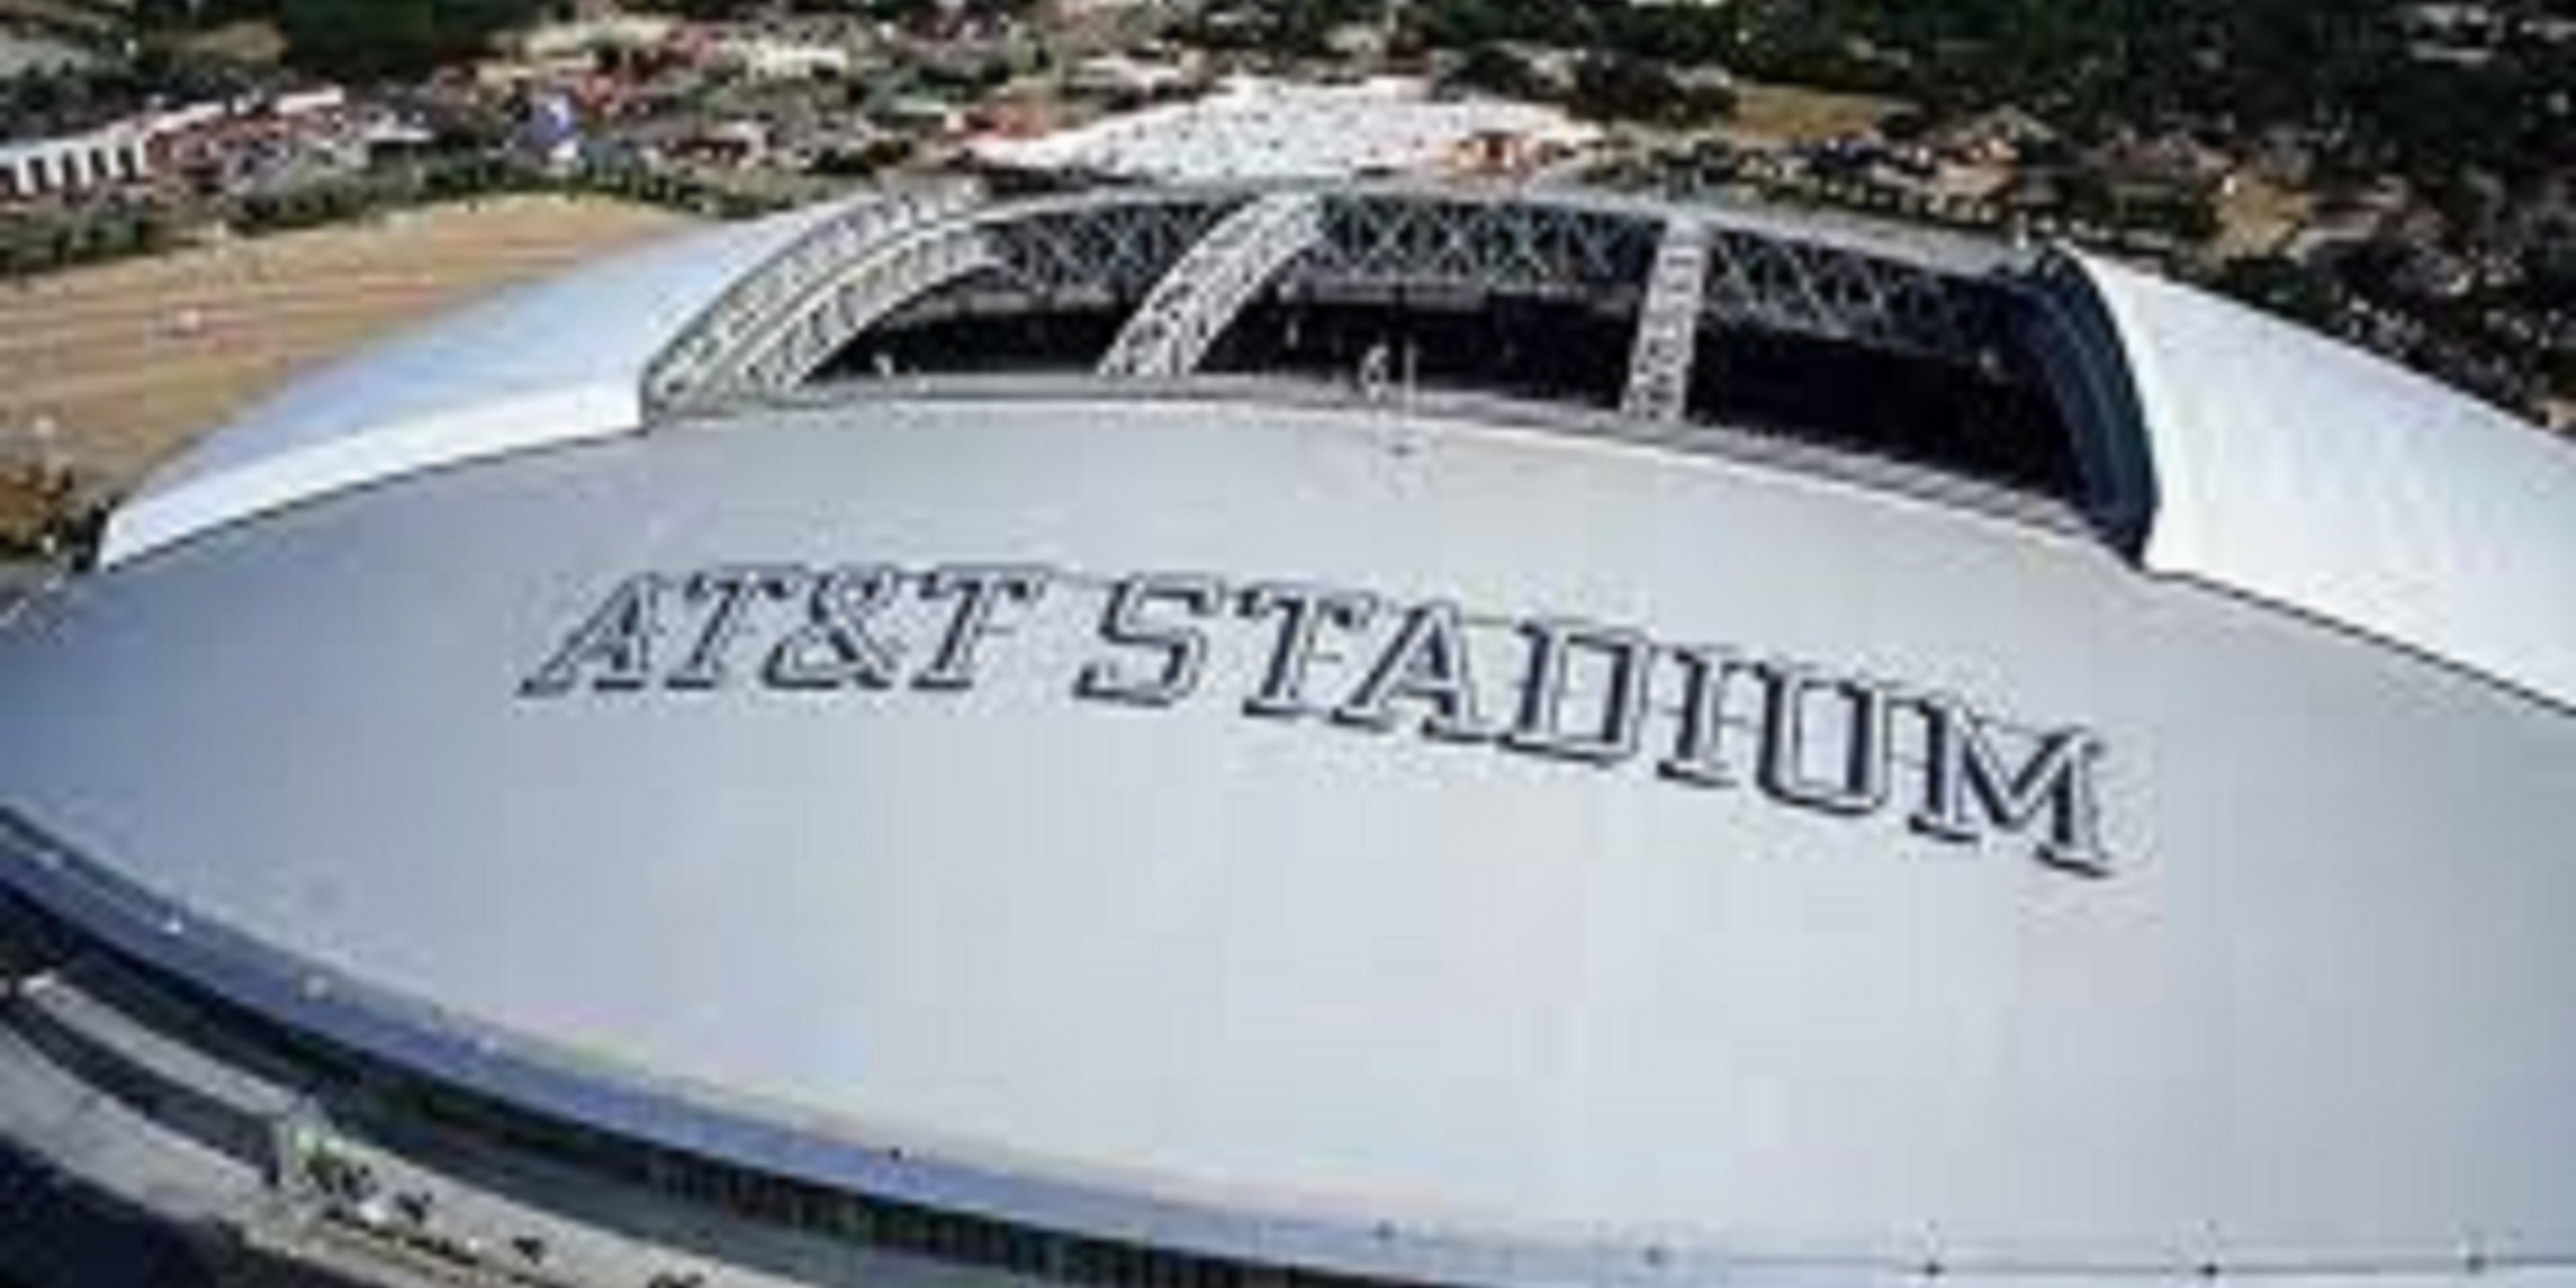 AT&T Stadium home to the Dallas Cowboys is a 20 minute drive from our hotel.  Discounted rates available.